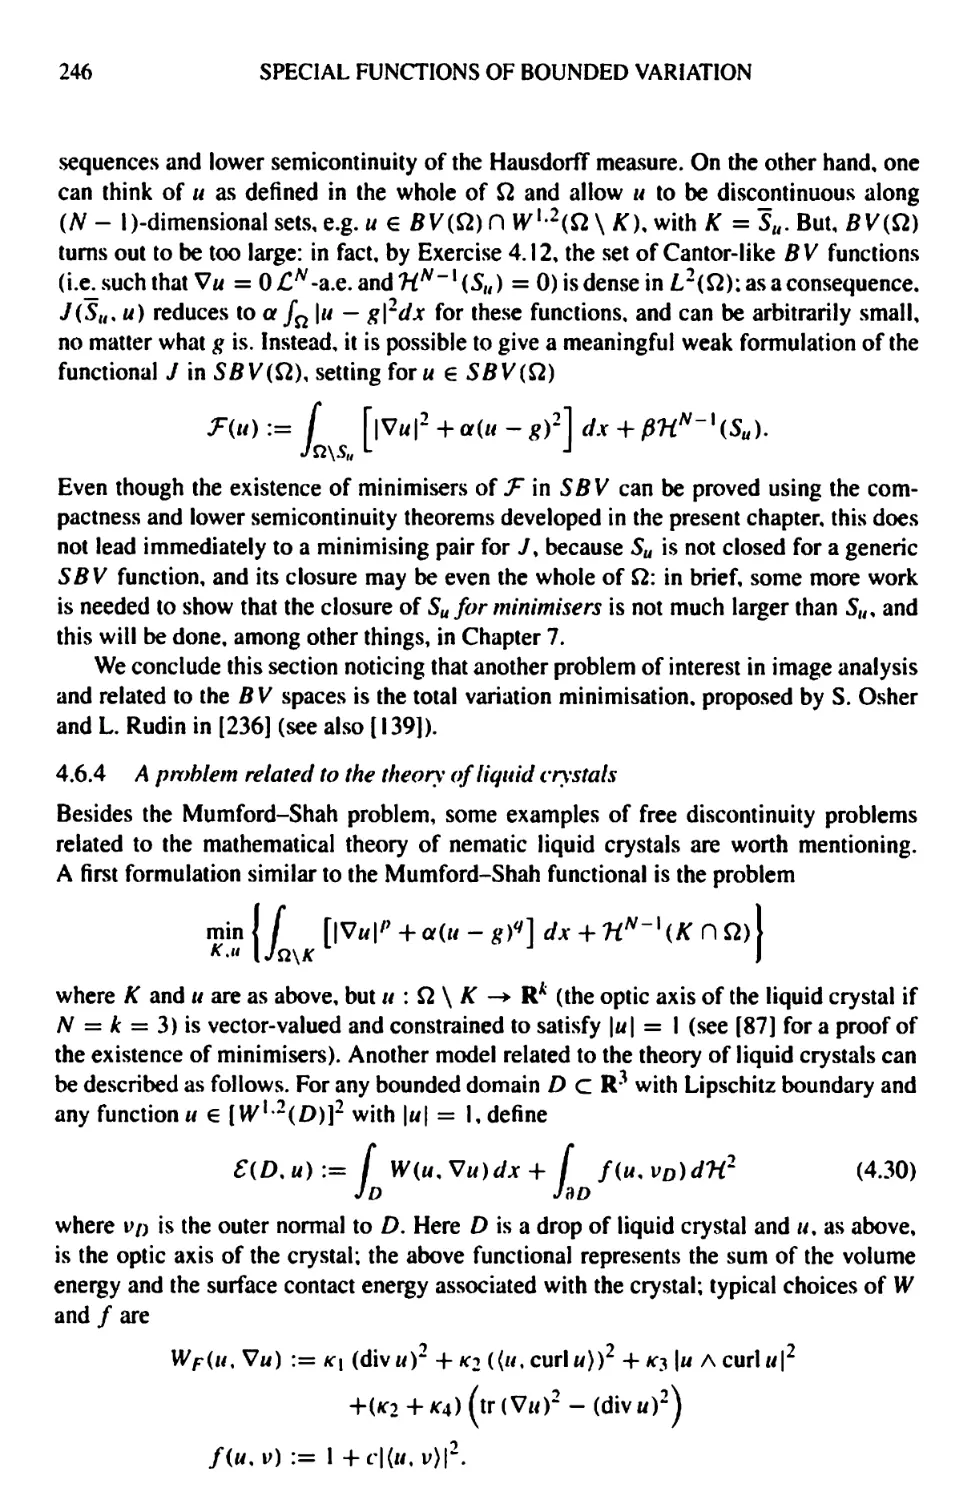 4.6.4 A problem related to the theory of liquid crystals